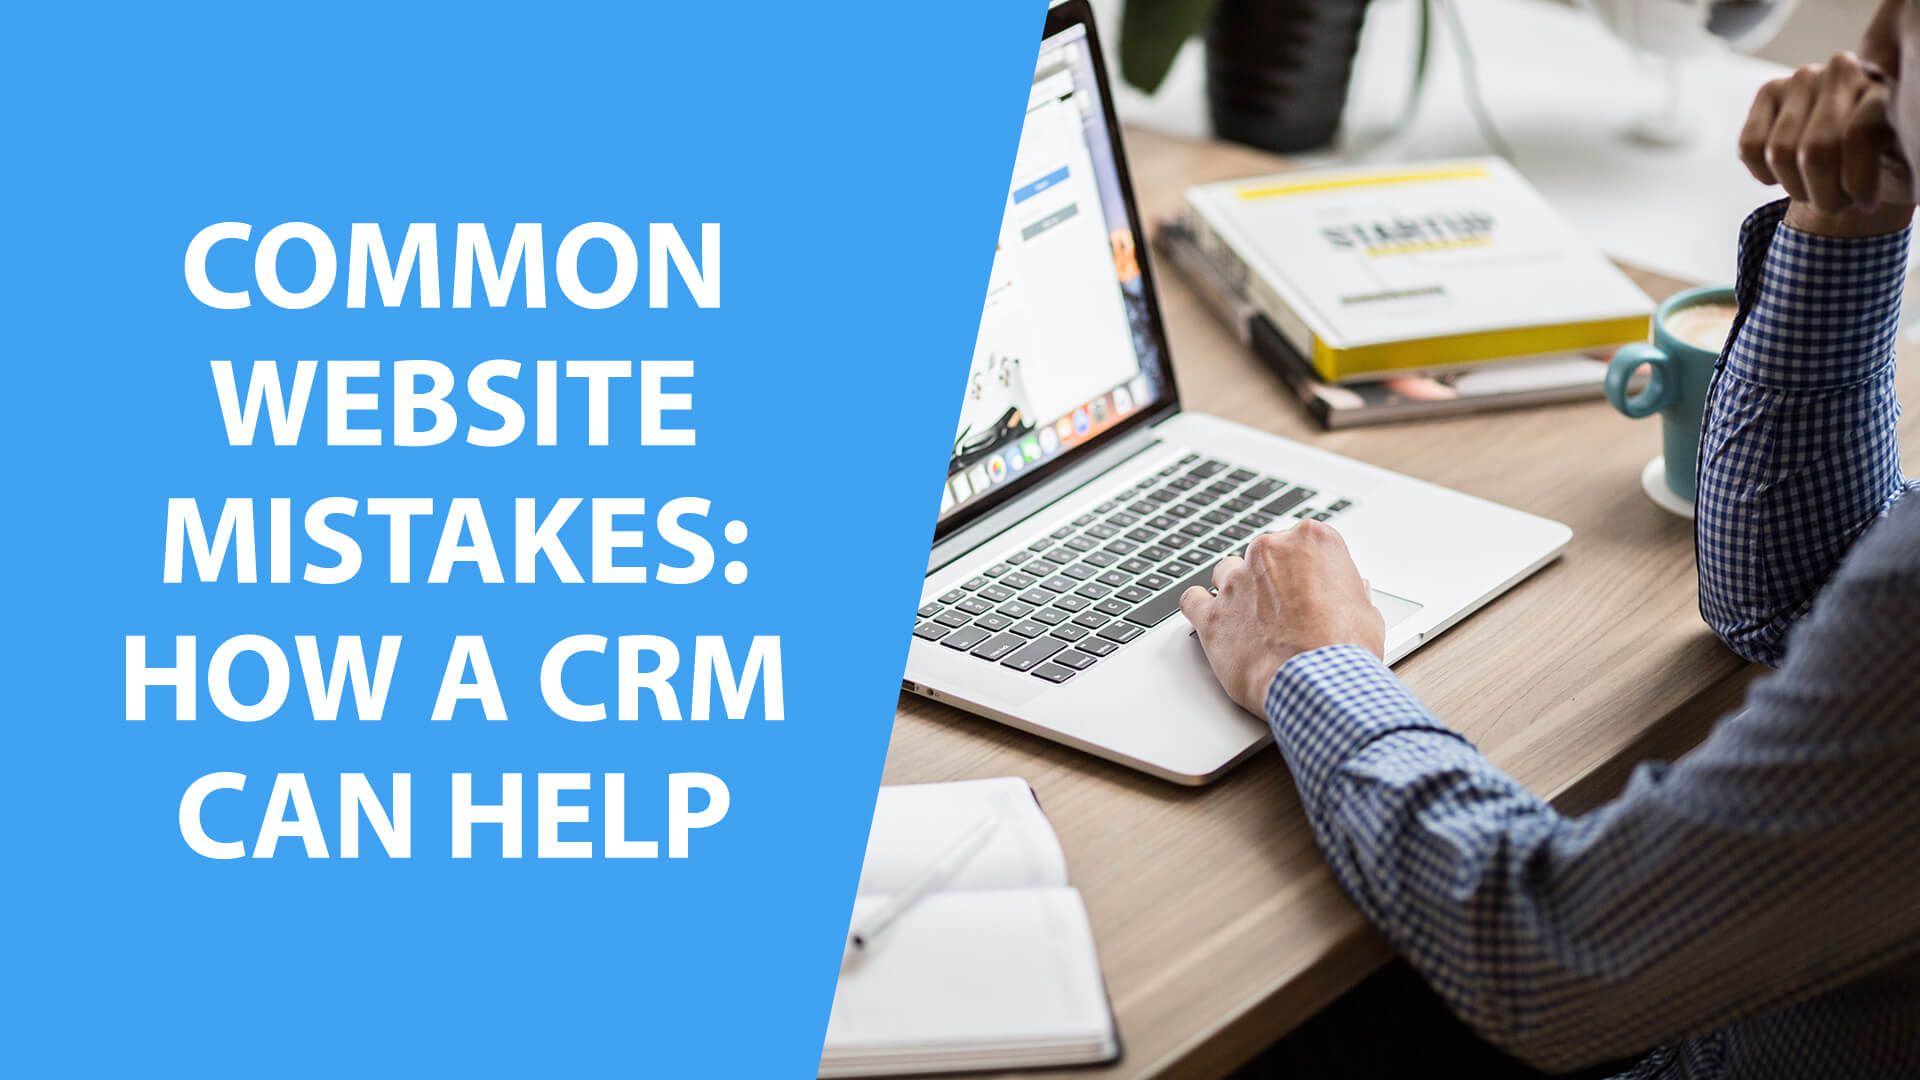 Common Website Mistakes: How a CRM Can Help